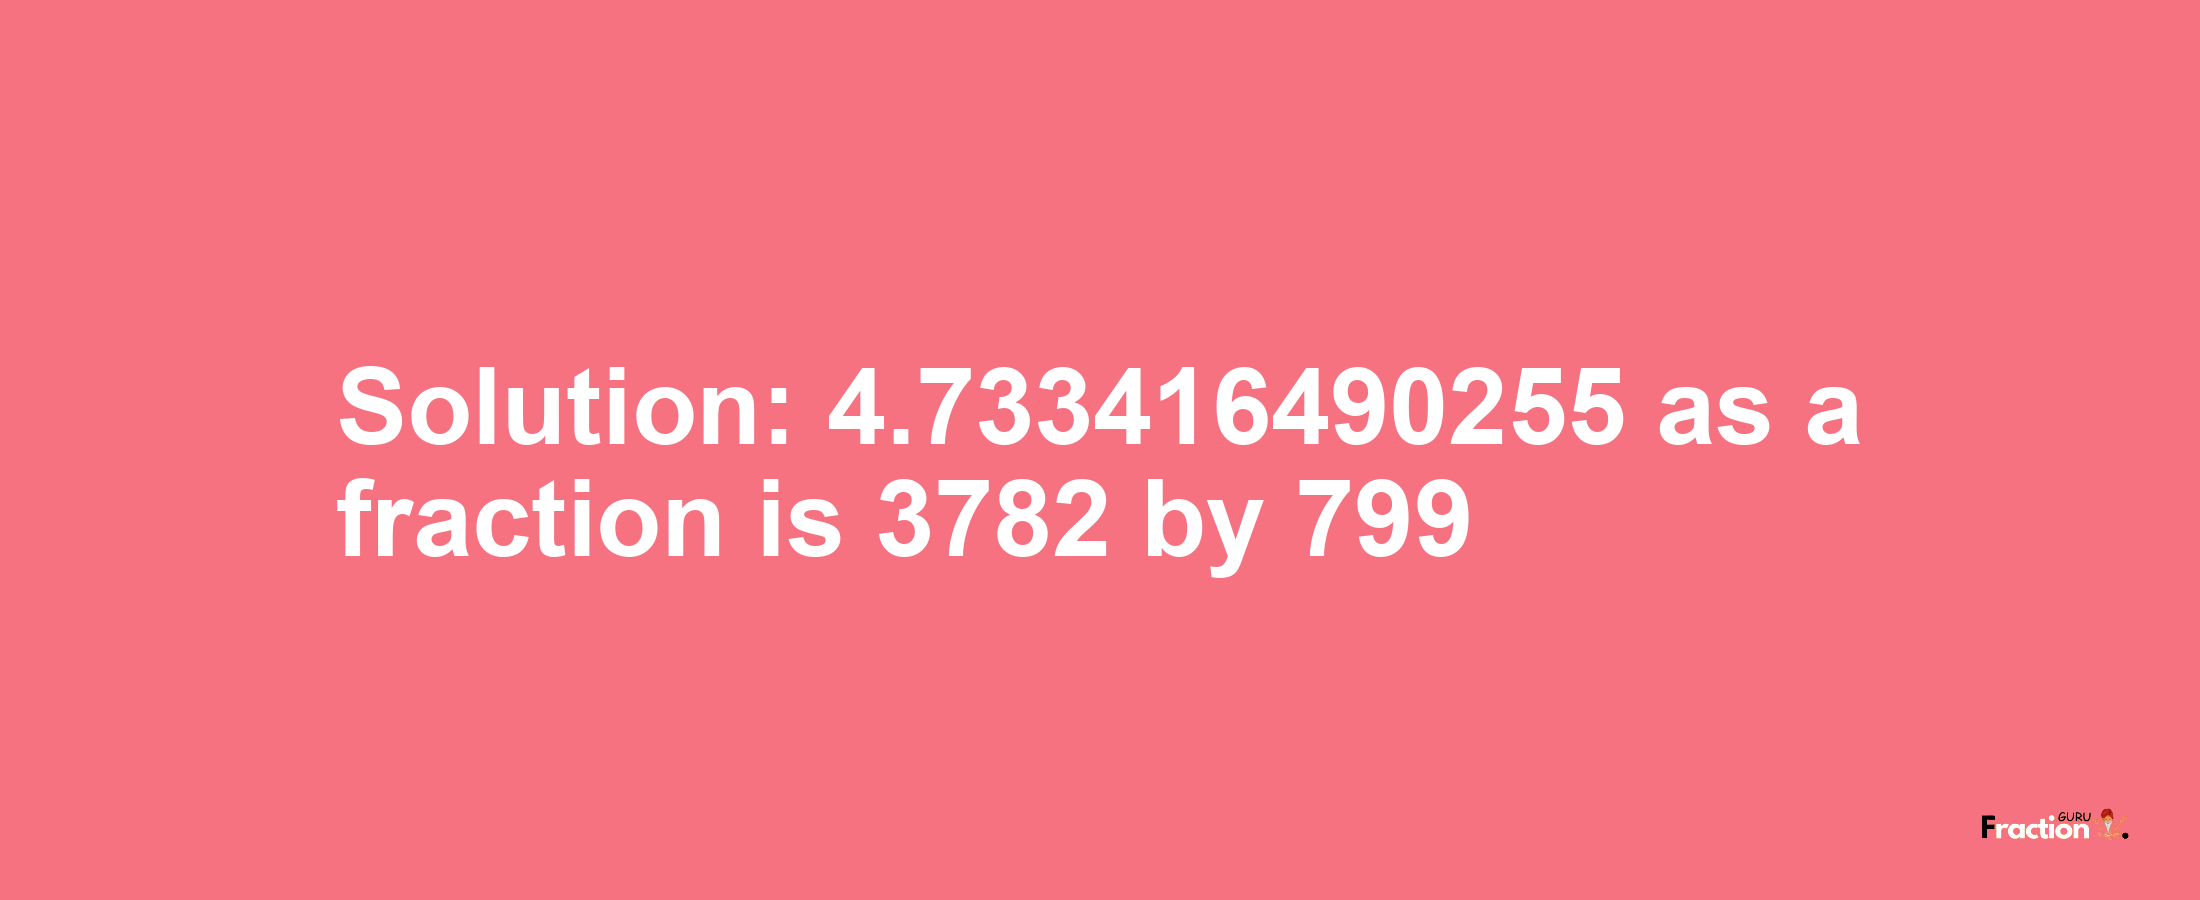 Solution:4.733416490255 as a fraction is 3782/799